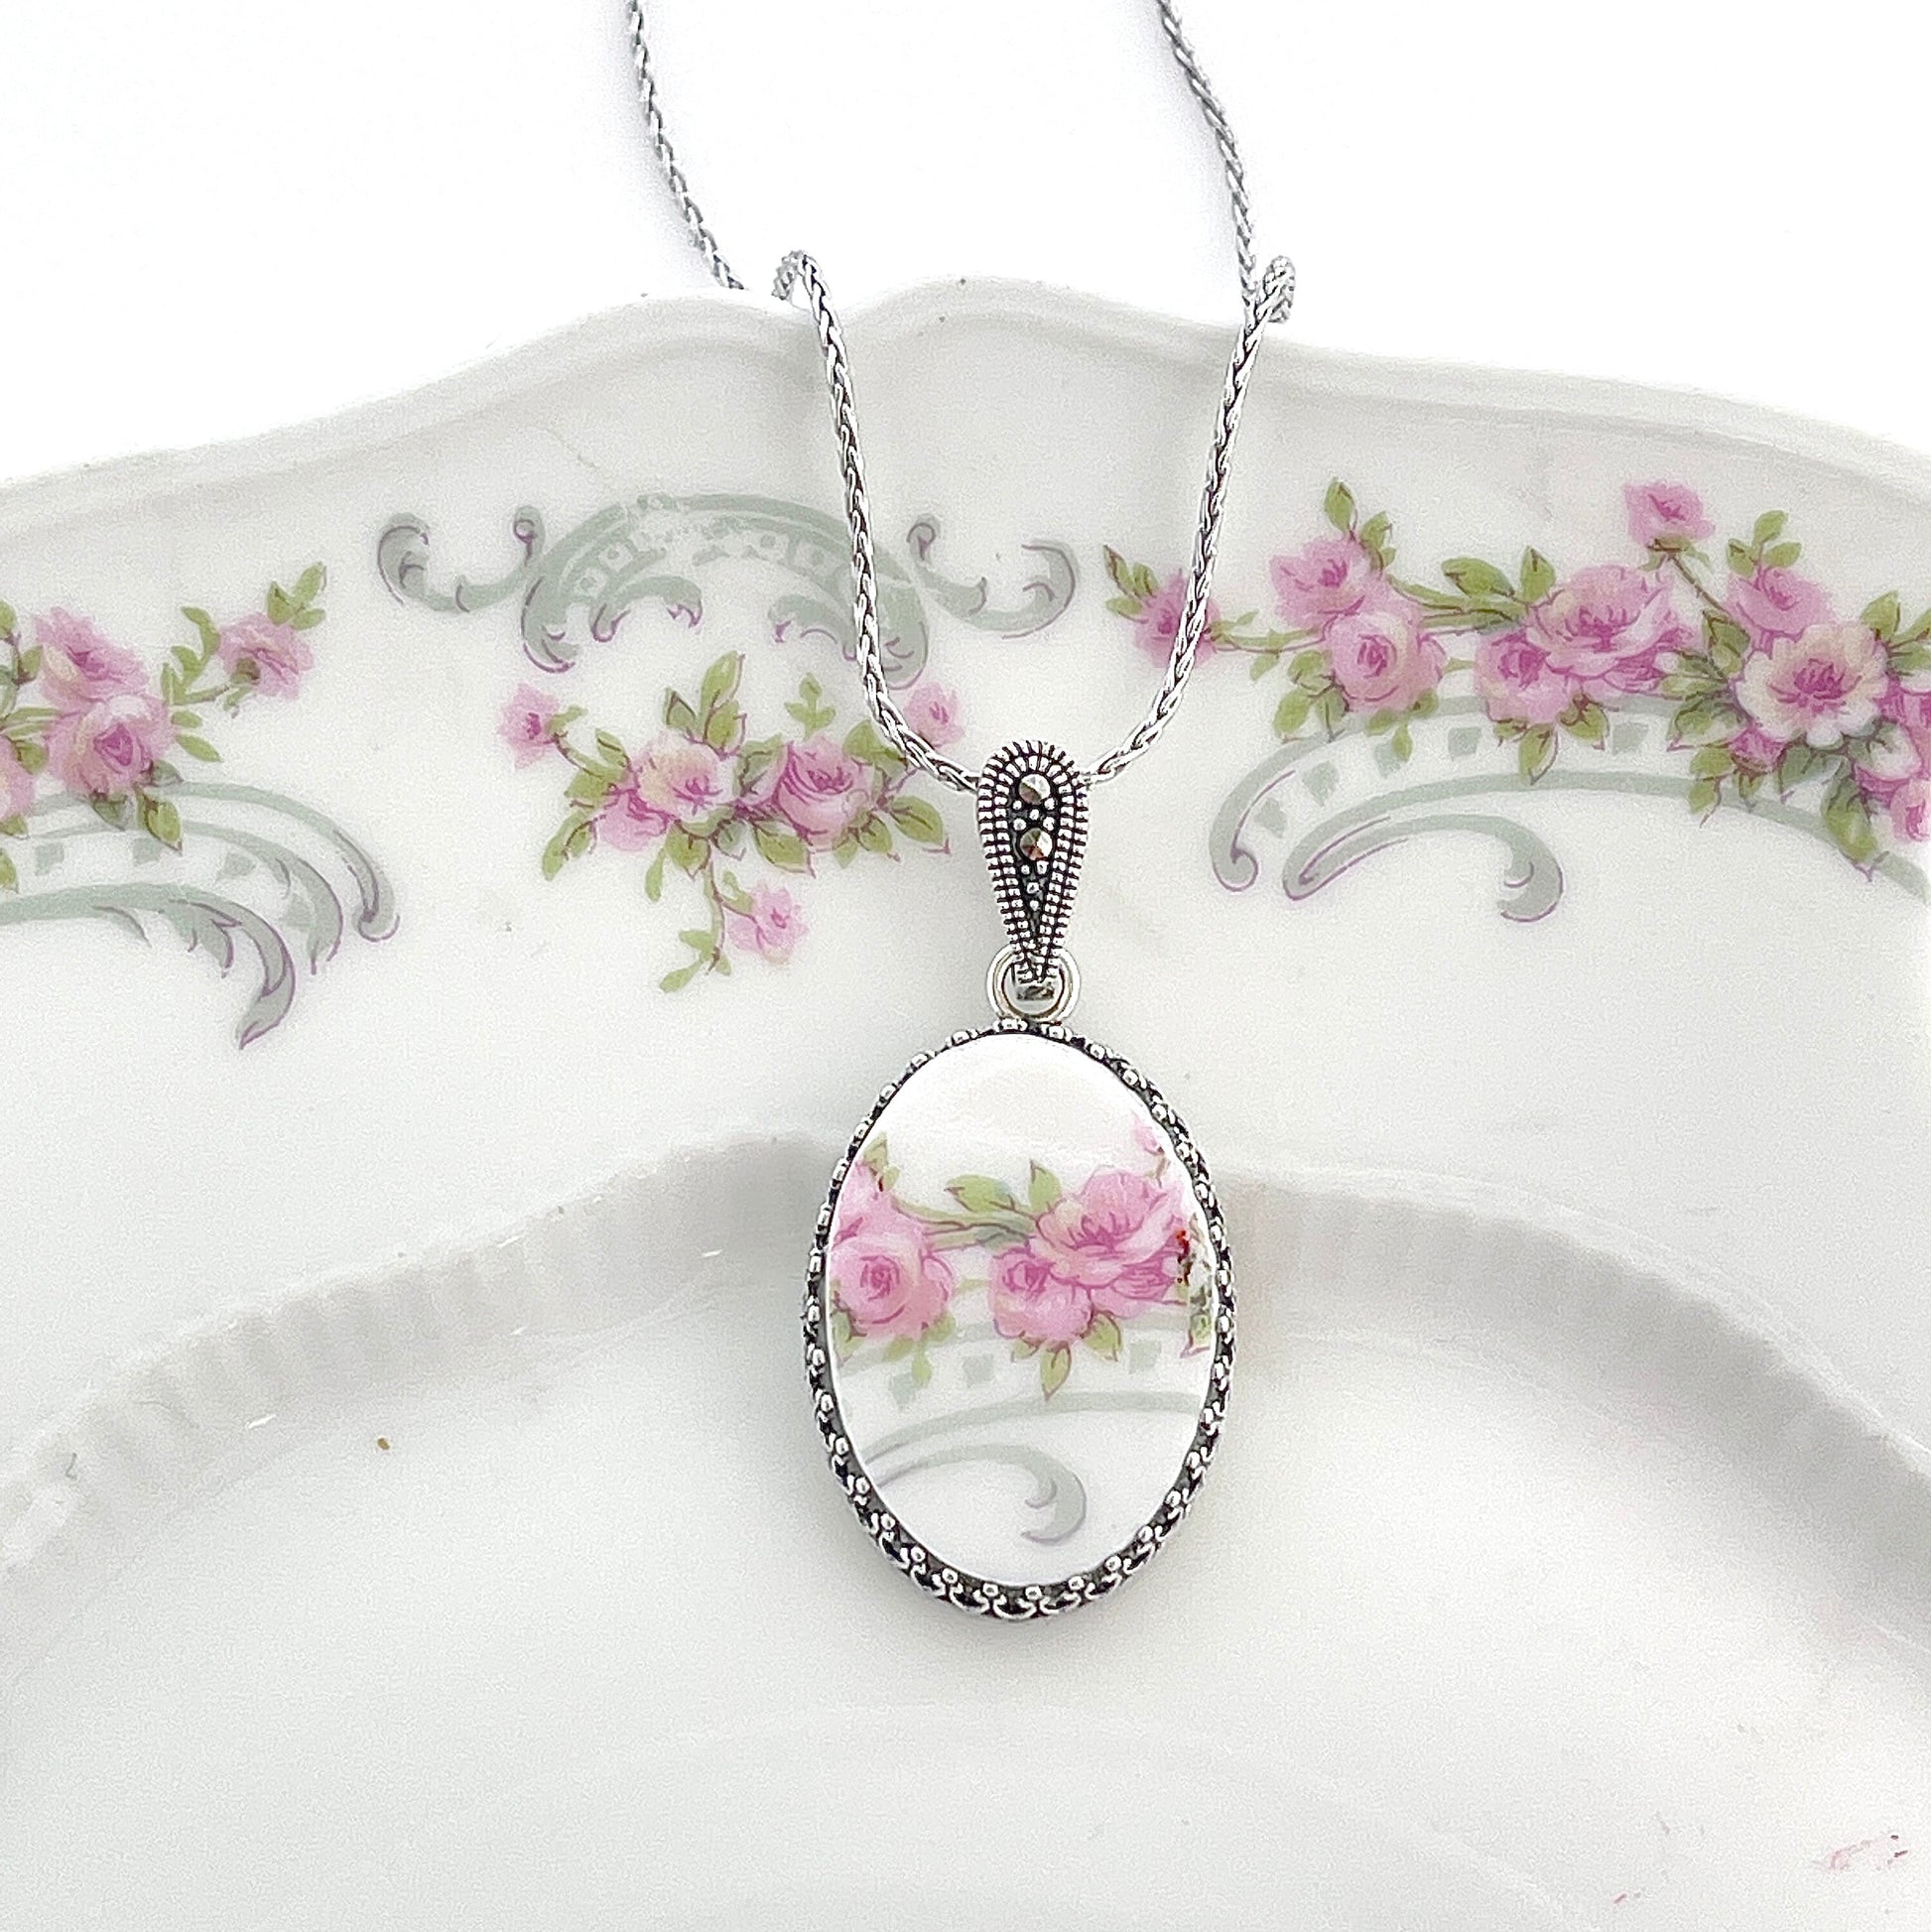 Adjustable Antique French Limoges China Pendant Necklace, 20th Anniversary Jewelry Gifts, Gift for Wife